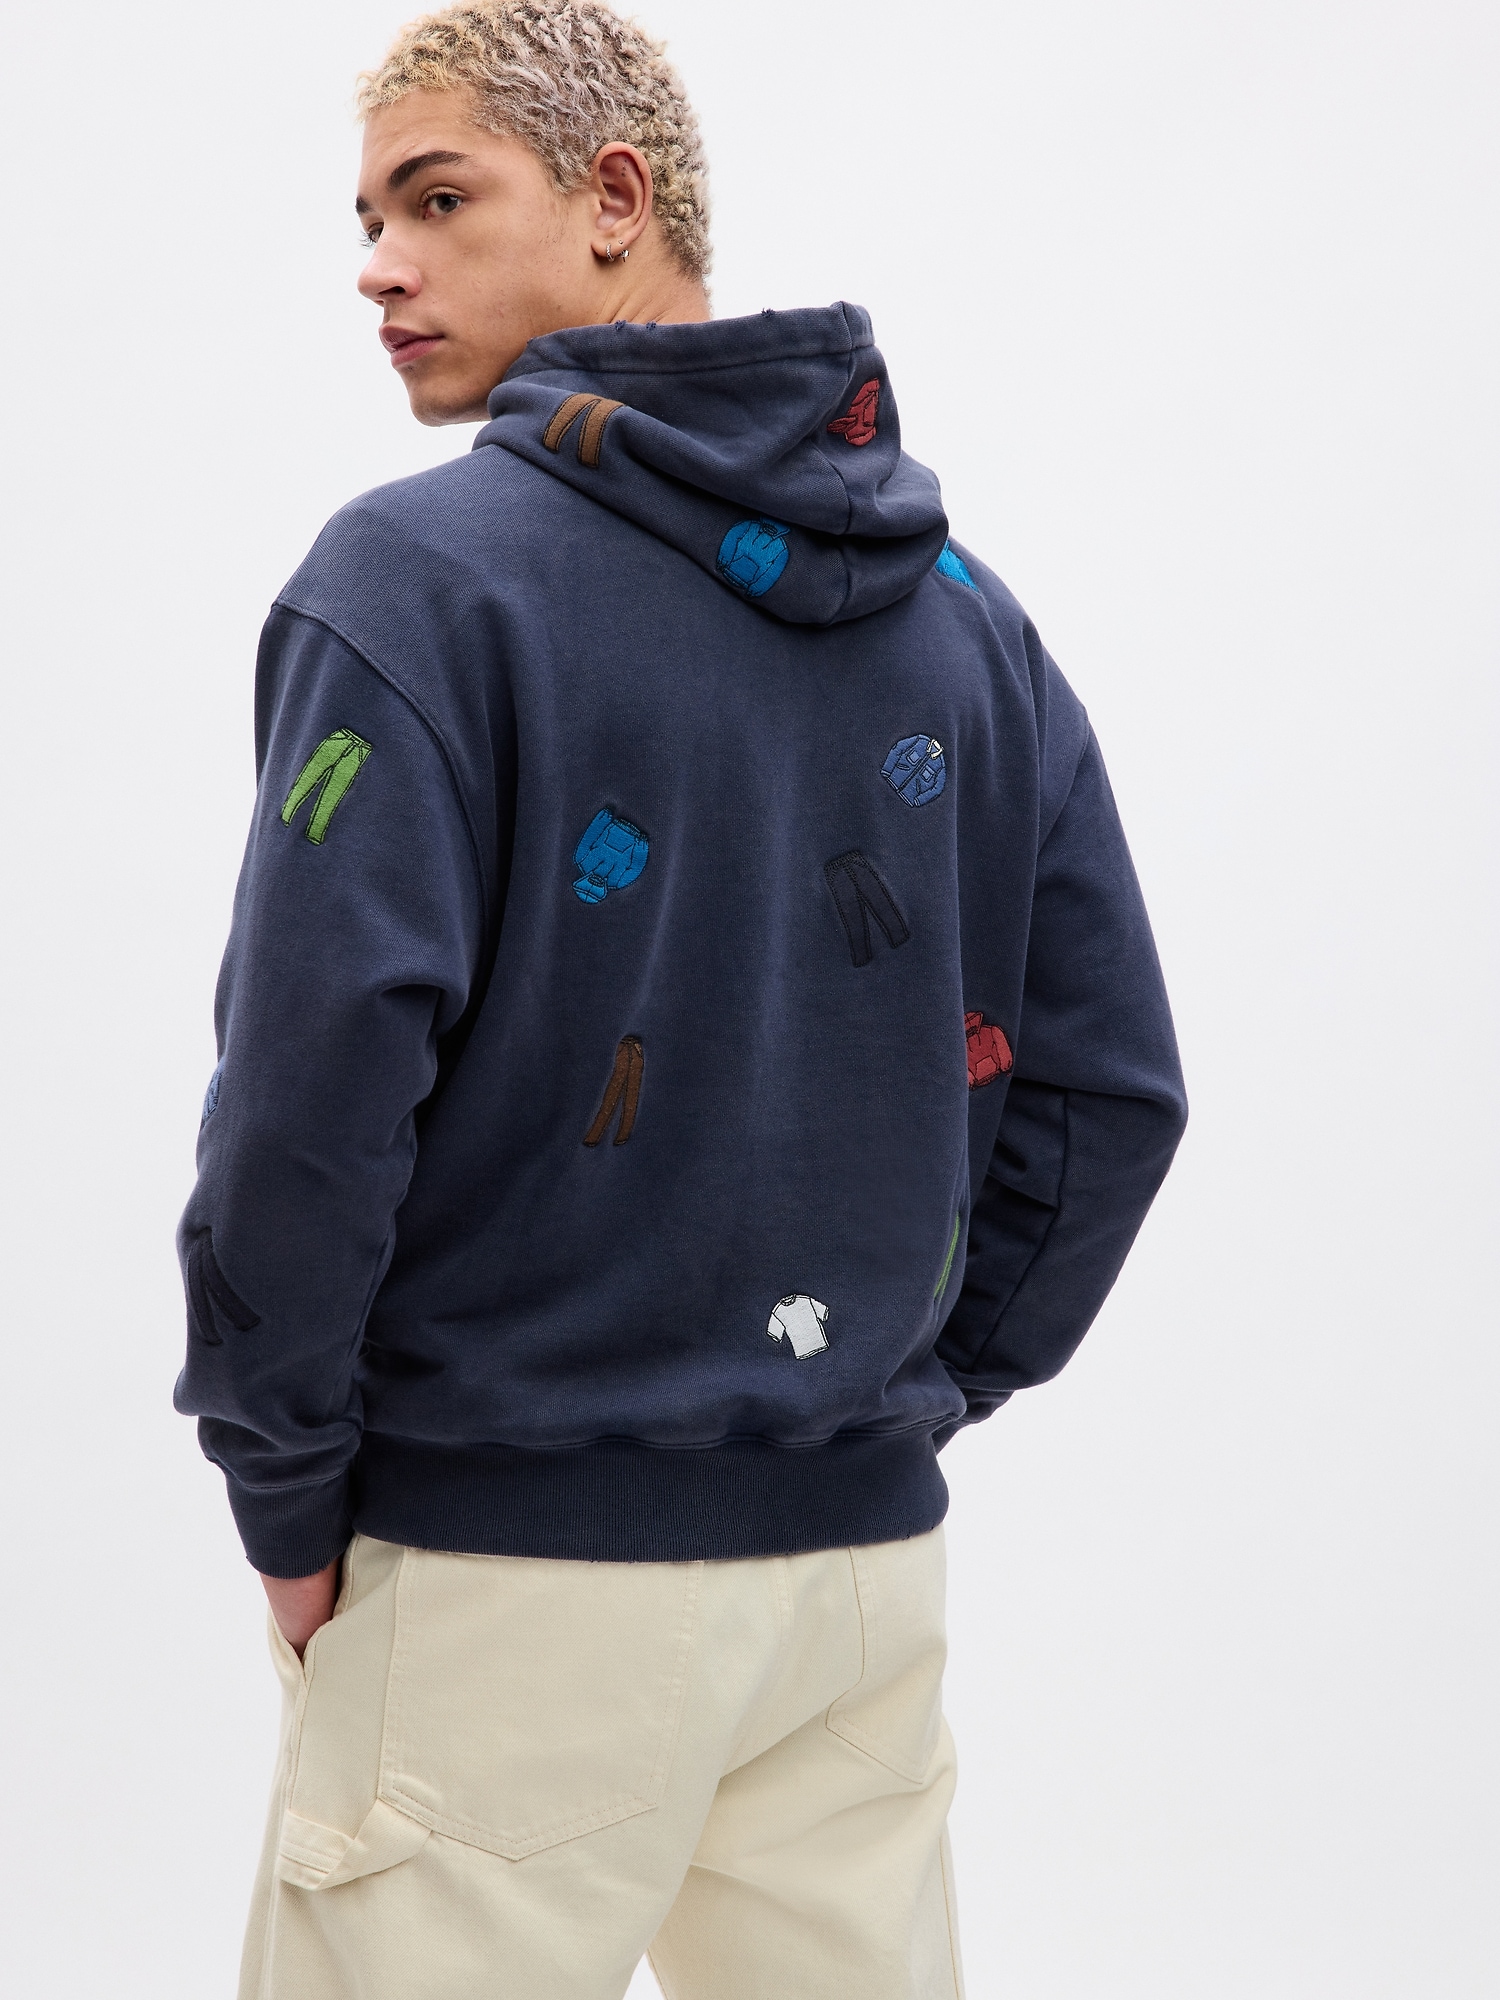 Gap公式オンラインストア | Re-Issue by Sean Wotherspoon 刺しゅう ...